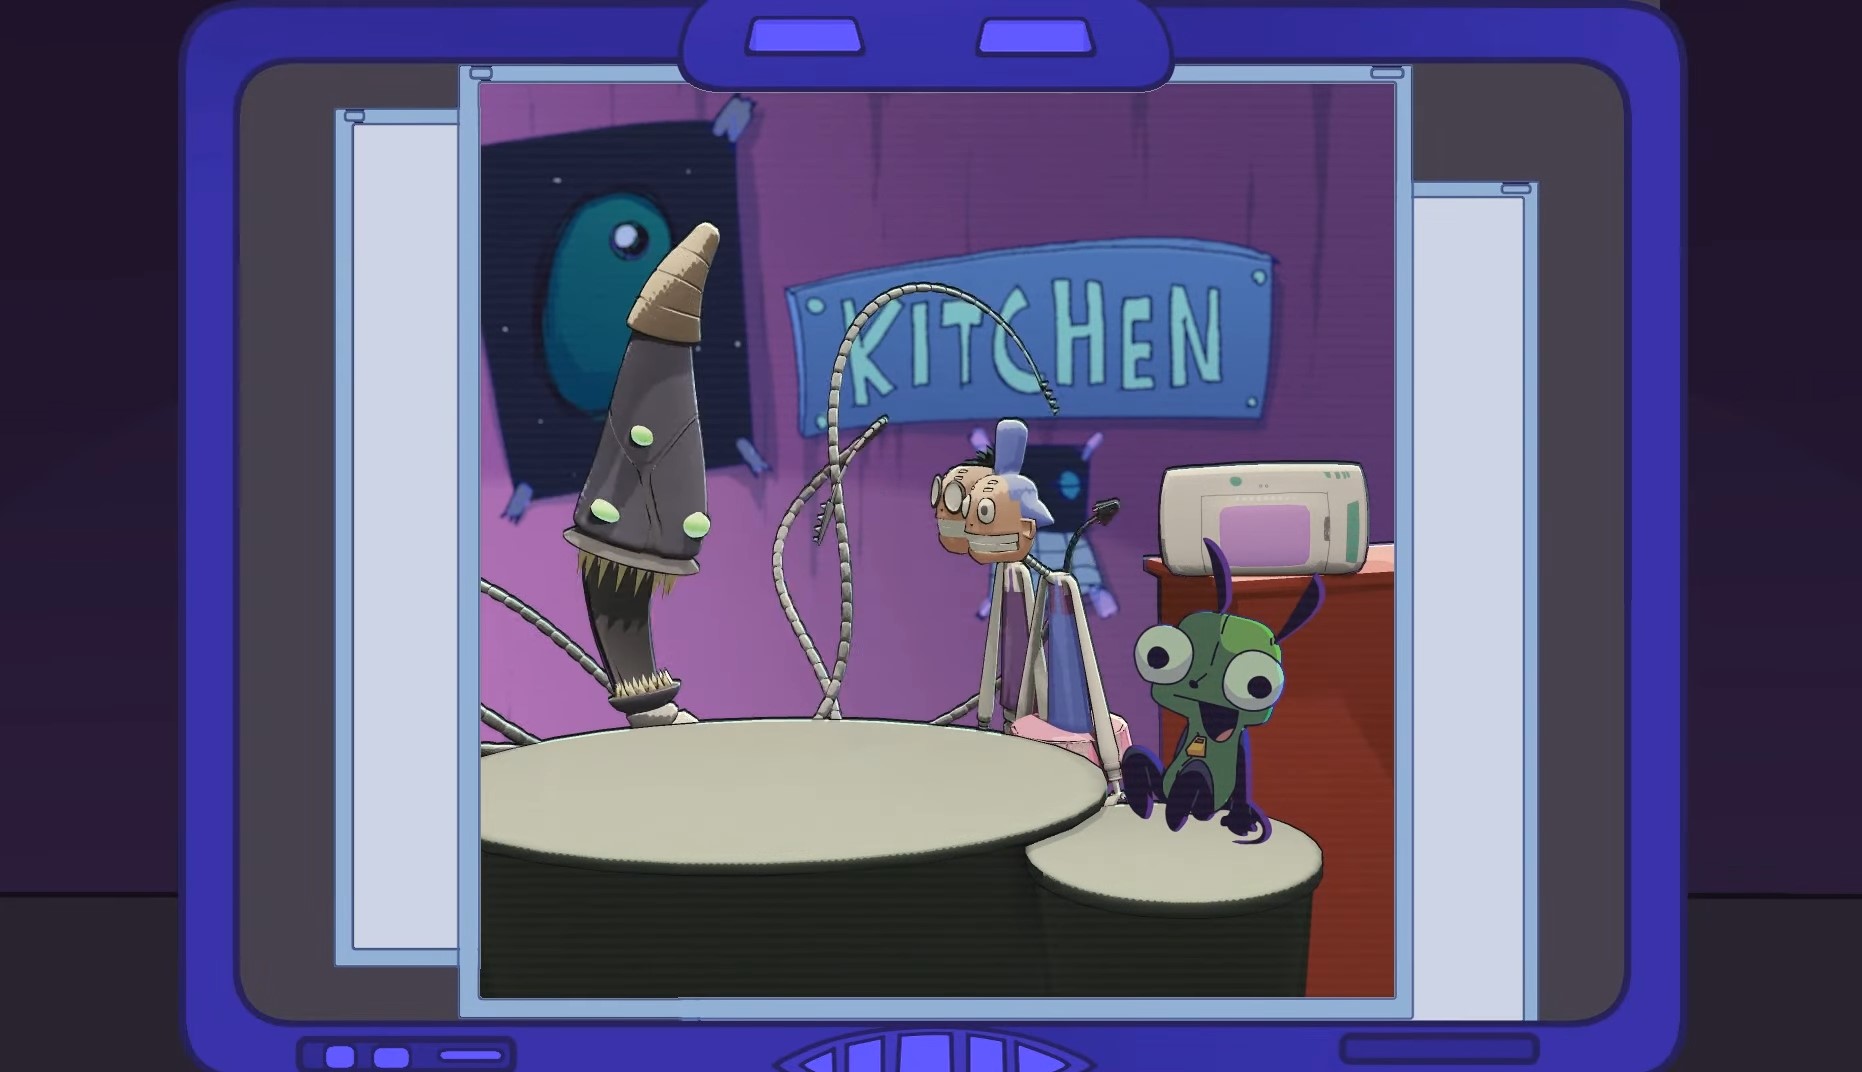 a screenshot from my shot in the invader zim reanimate project